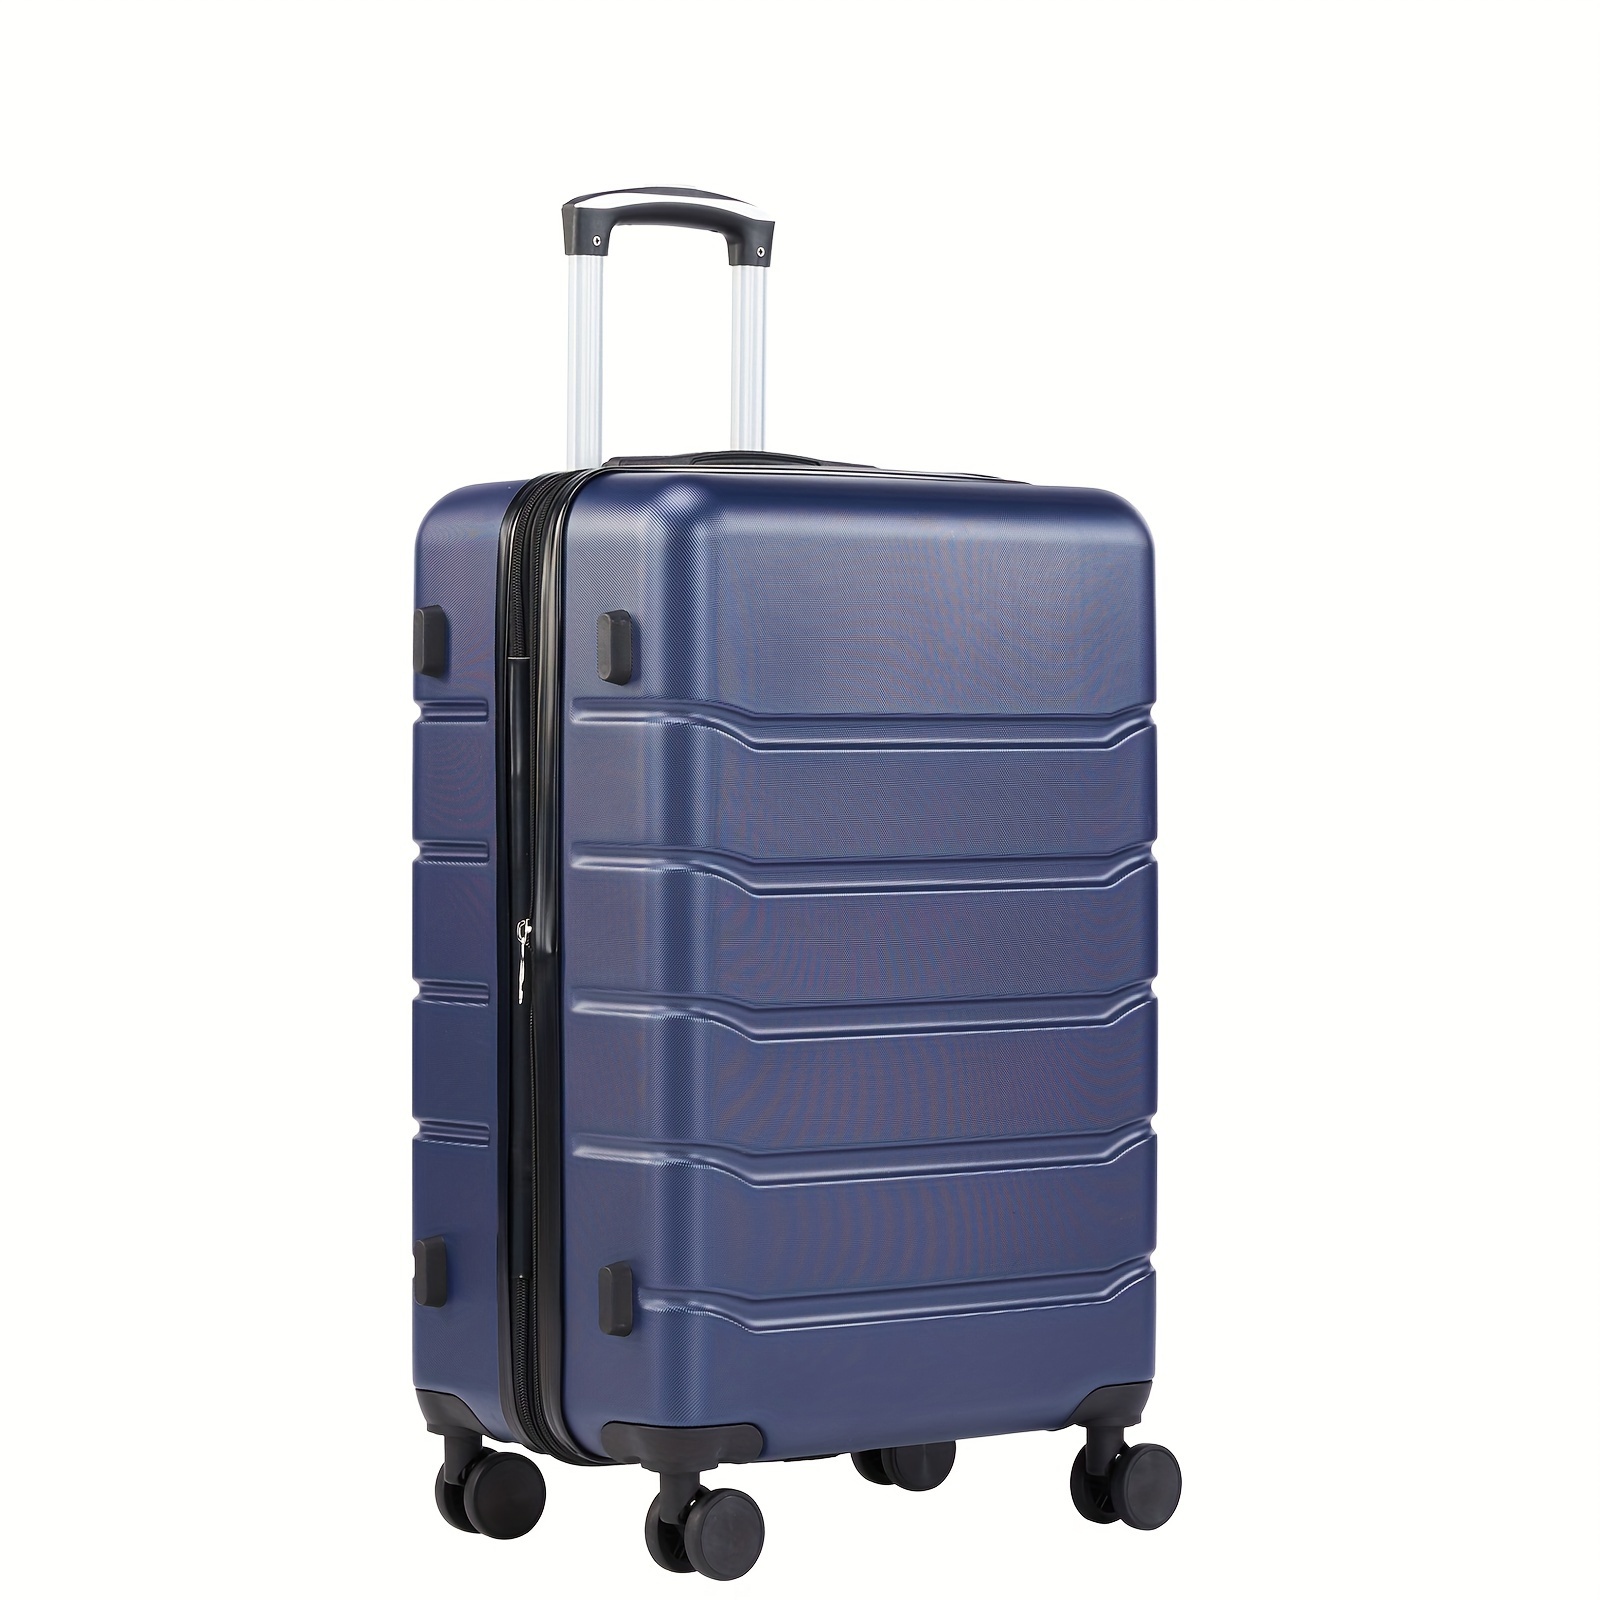 

Carry On Luggage 20 Inch, Hard Shell Abs Suitcase With Double Spinner Wheels, Lightweight Expandable Rolling Luggage With Tsa Lock, Blue